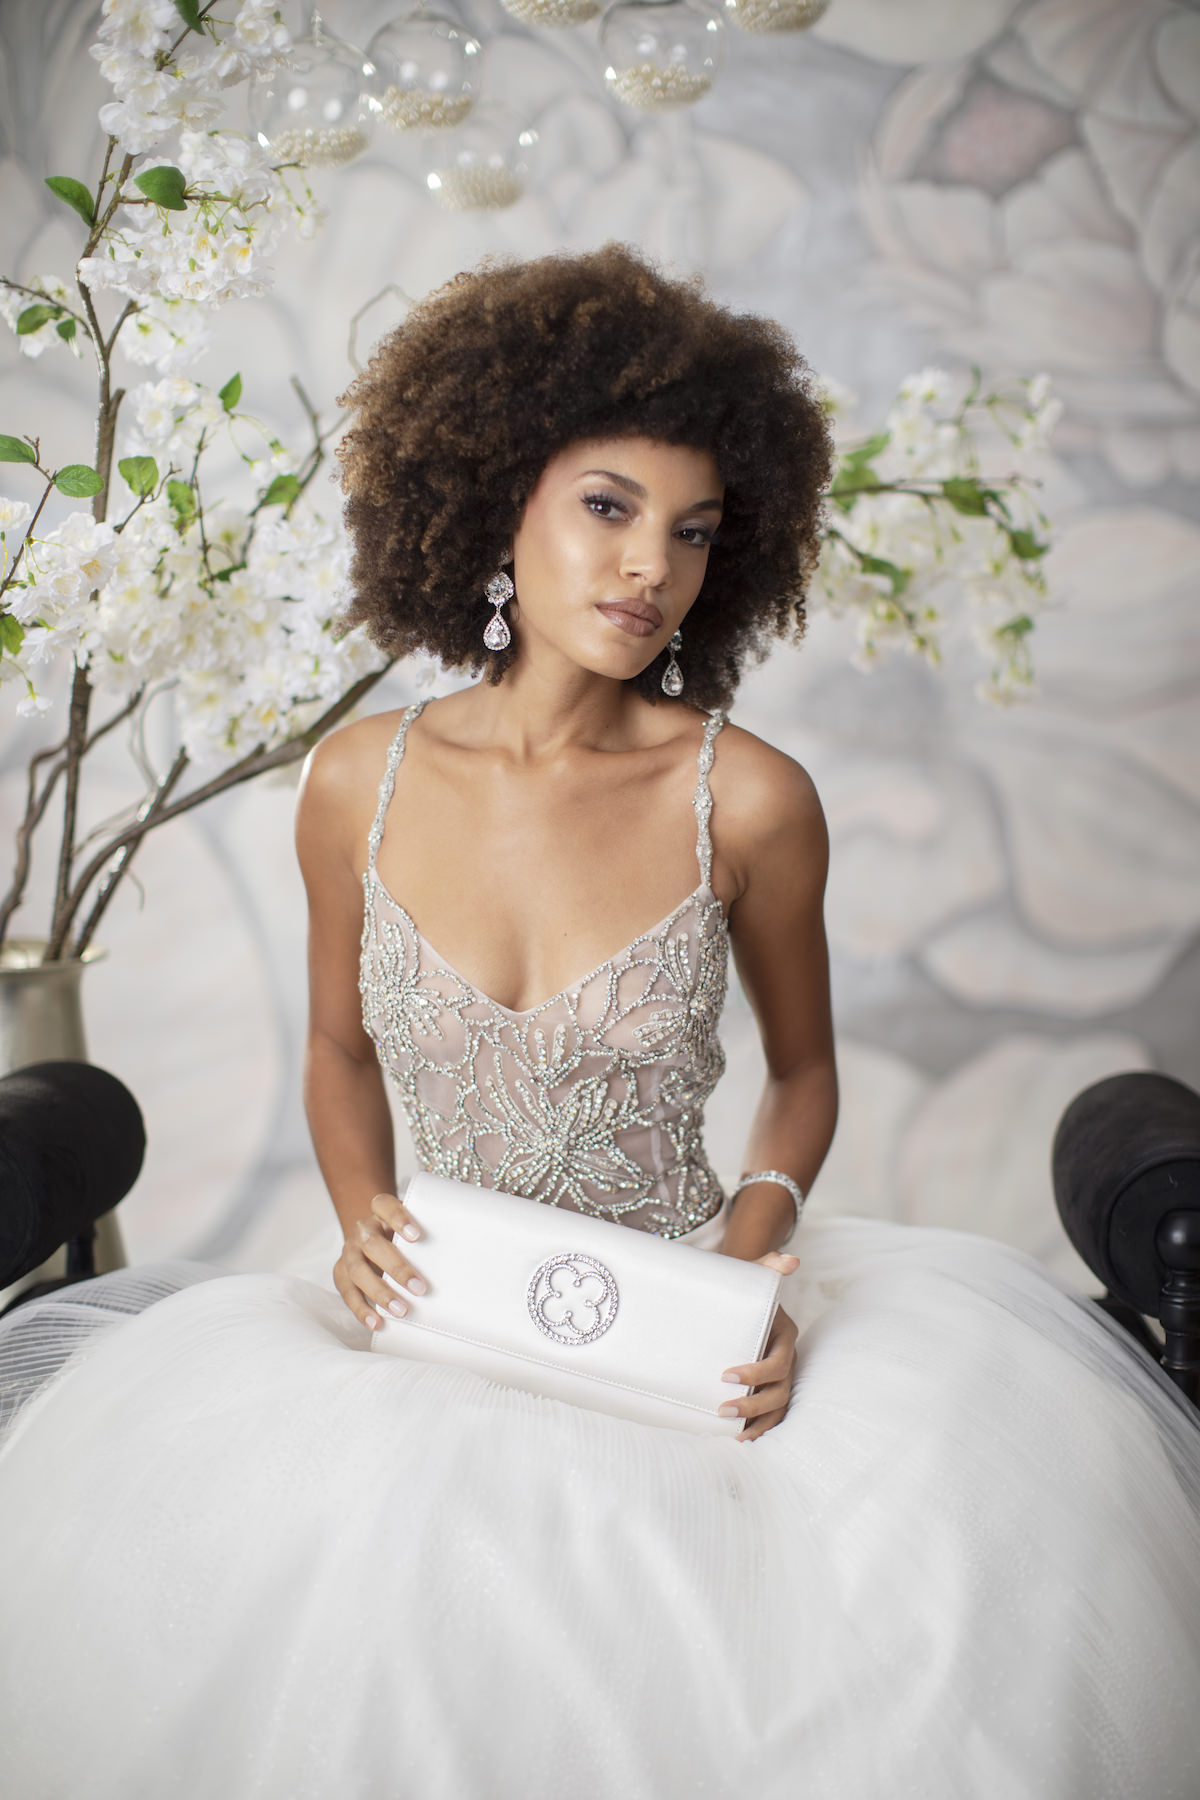 Luxury bridal accessories - The Mrs Clutch